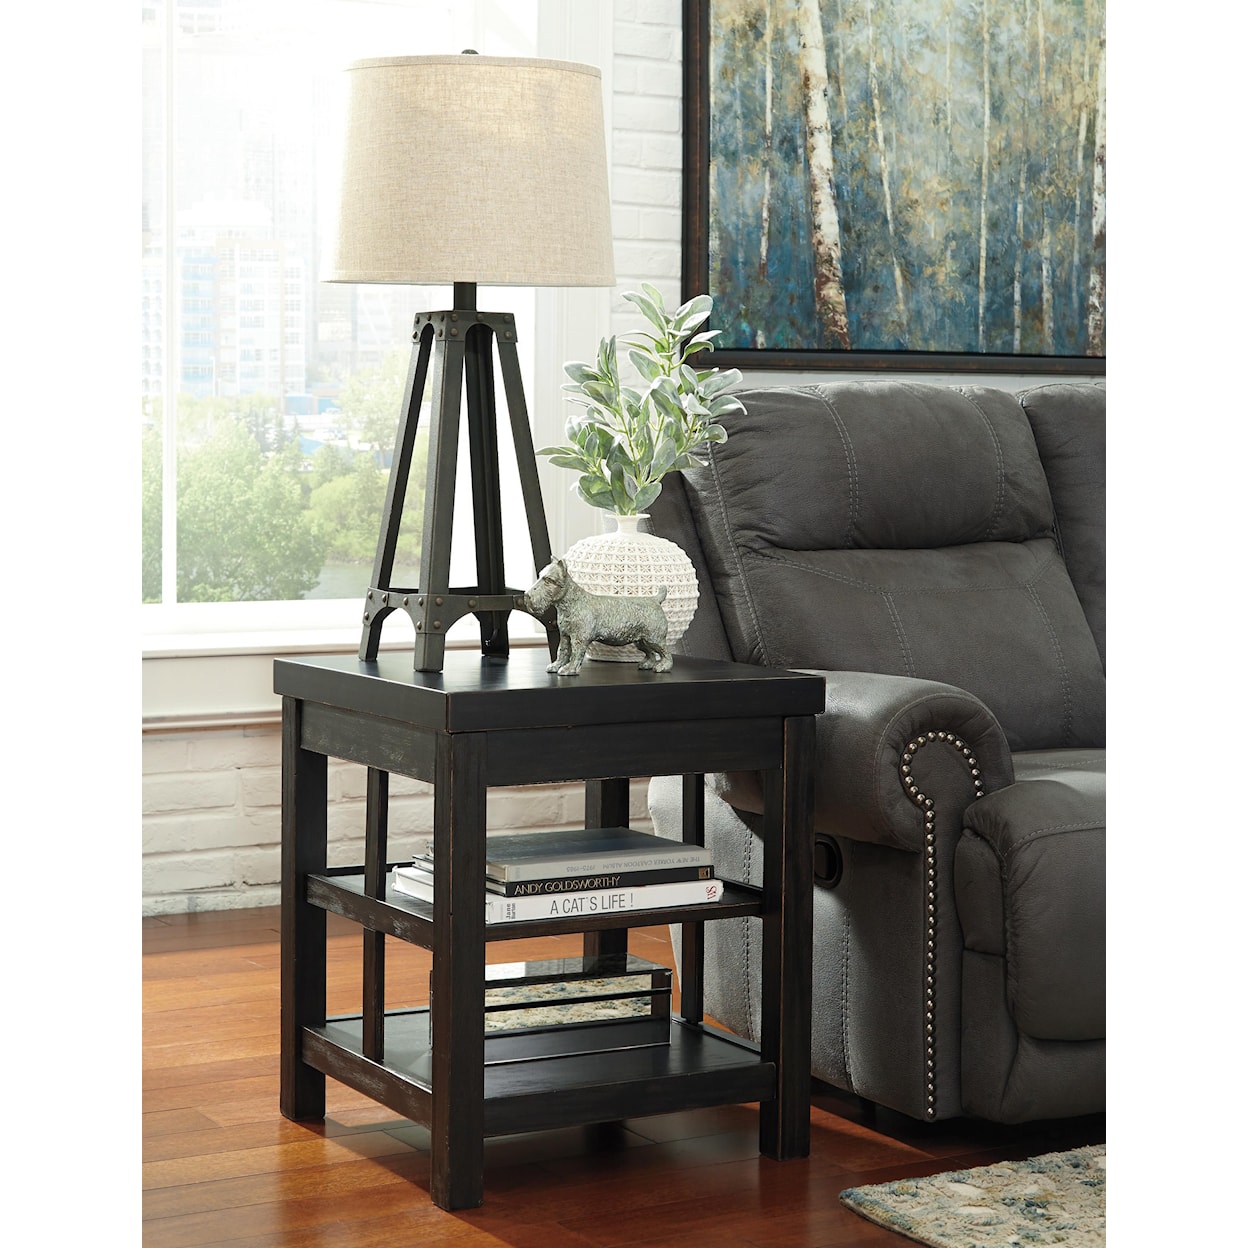 Signature Design by Ashley Gavelston Square End Table